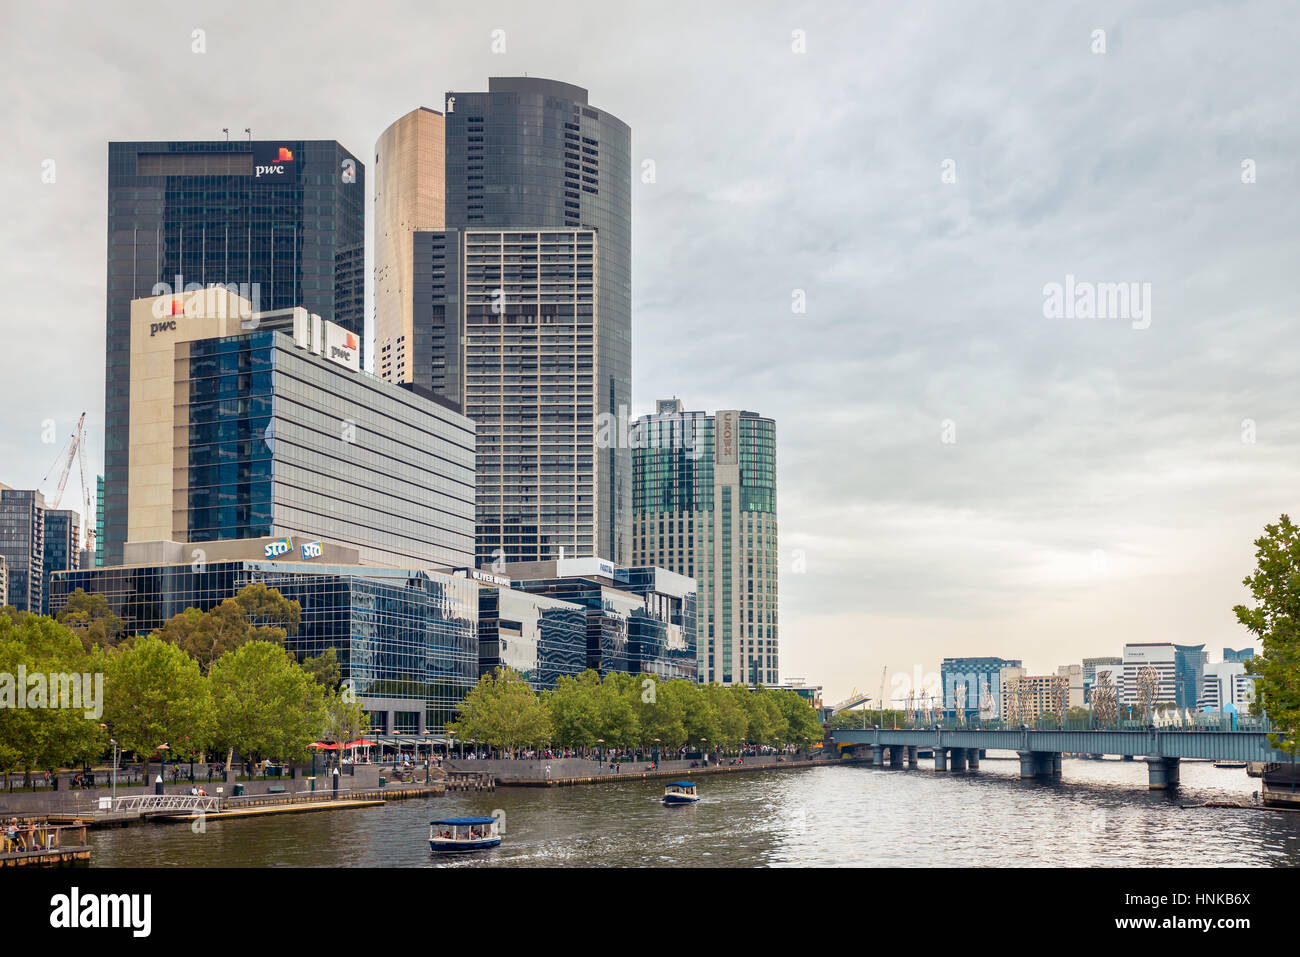 Melbourne, Australia - December 27, 2016: Melbourne city view with people traveling on boats along the Yarra river, Victoria Stock Photo